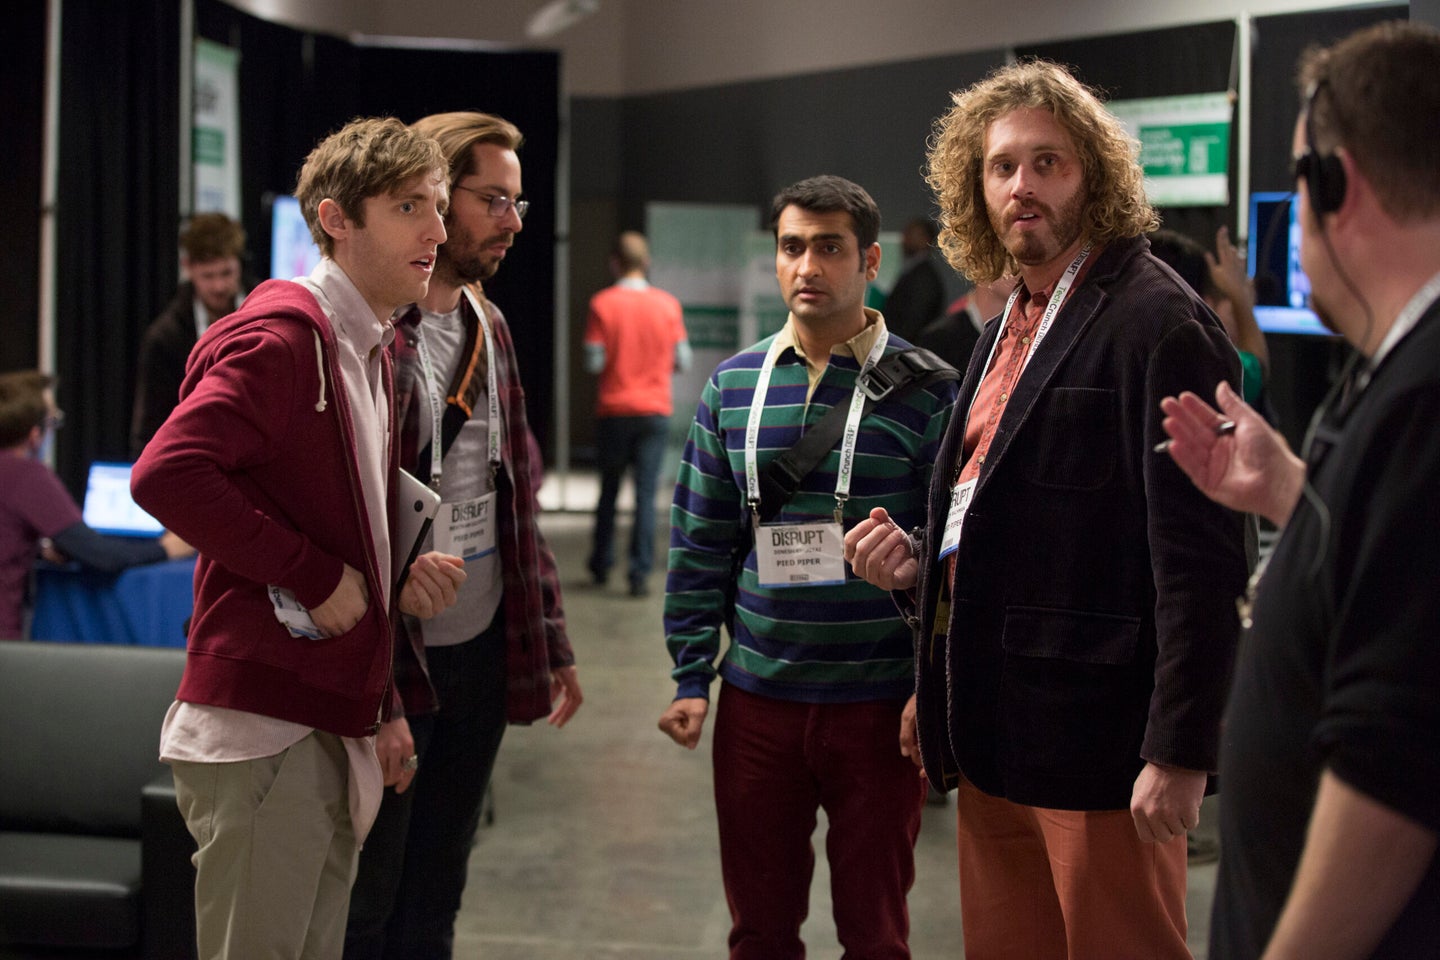 Behind the scenes Silicon Valley's showrunners deeply investigate programmer's annoyances.